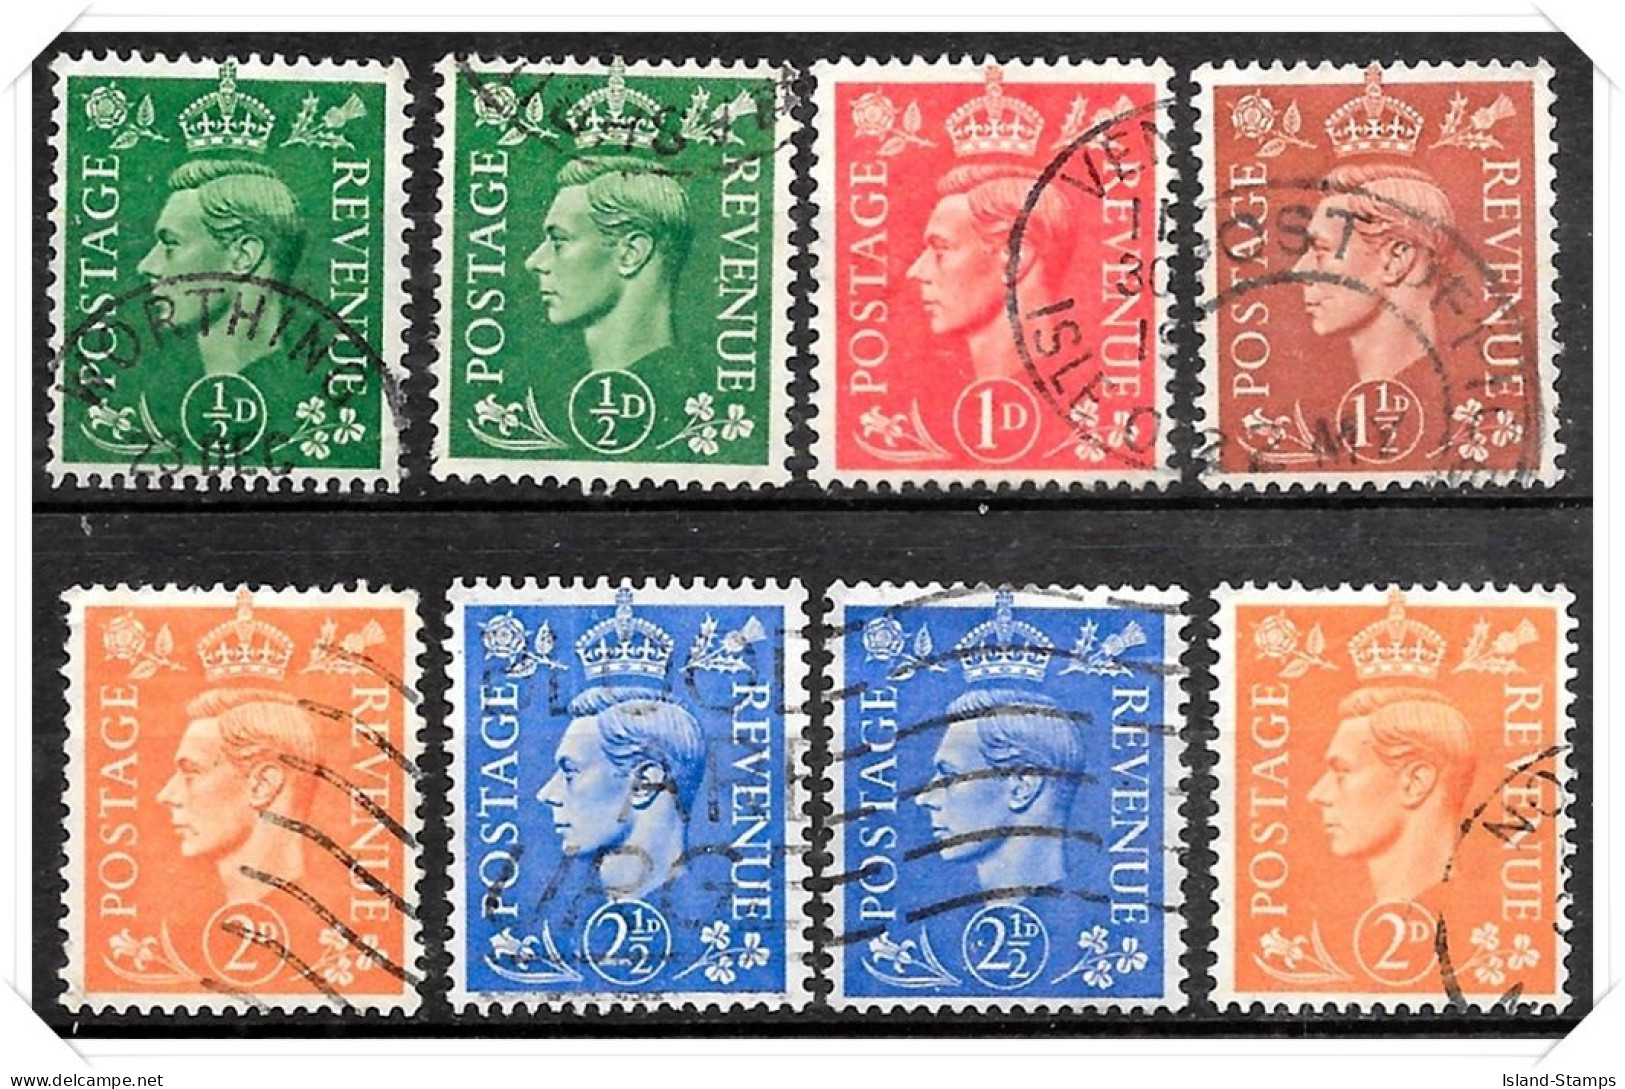 KGVI 1941 Definitives Colour Change SG485 - SG490 Used & Mounted Mint Hrd2a - Unused Stamps